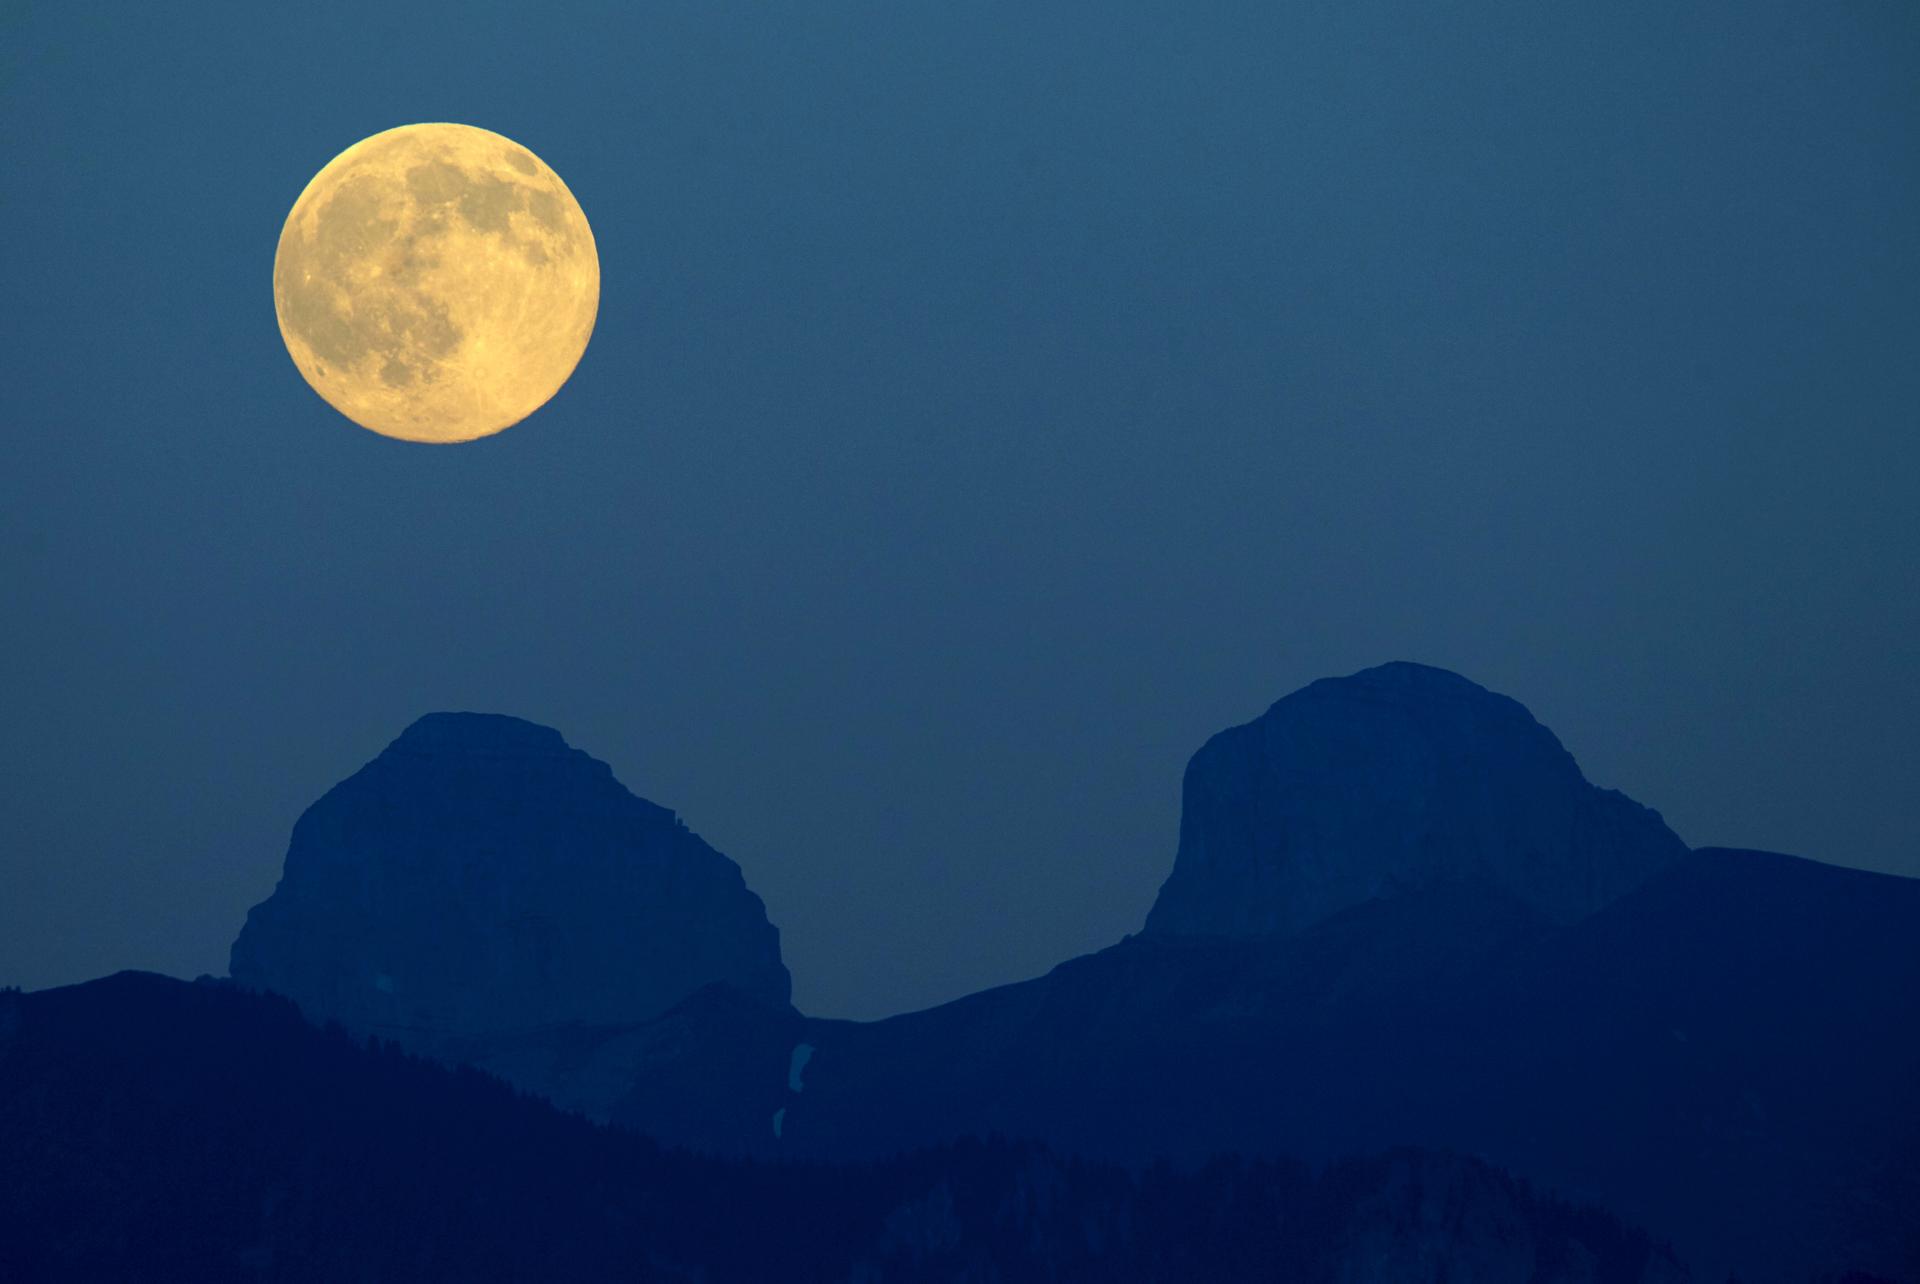 The full moon rises over the Swiss Alps